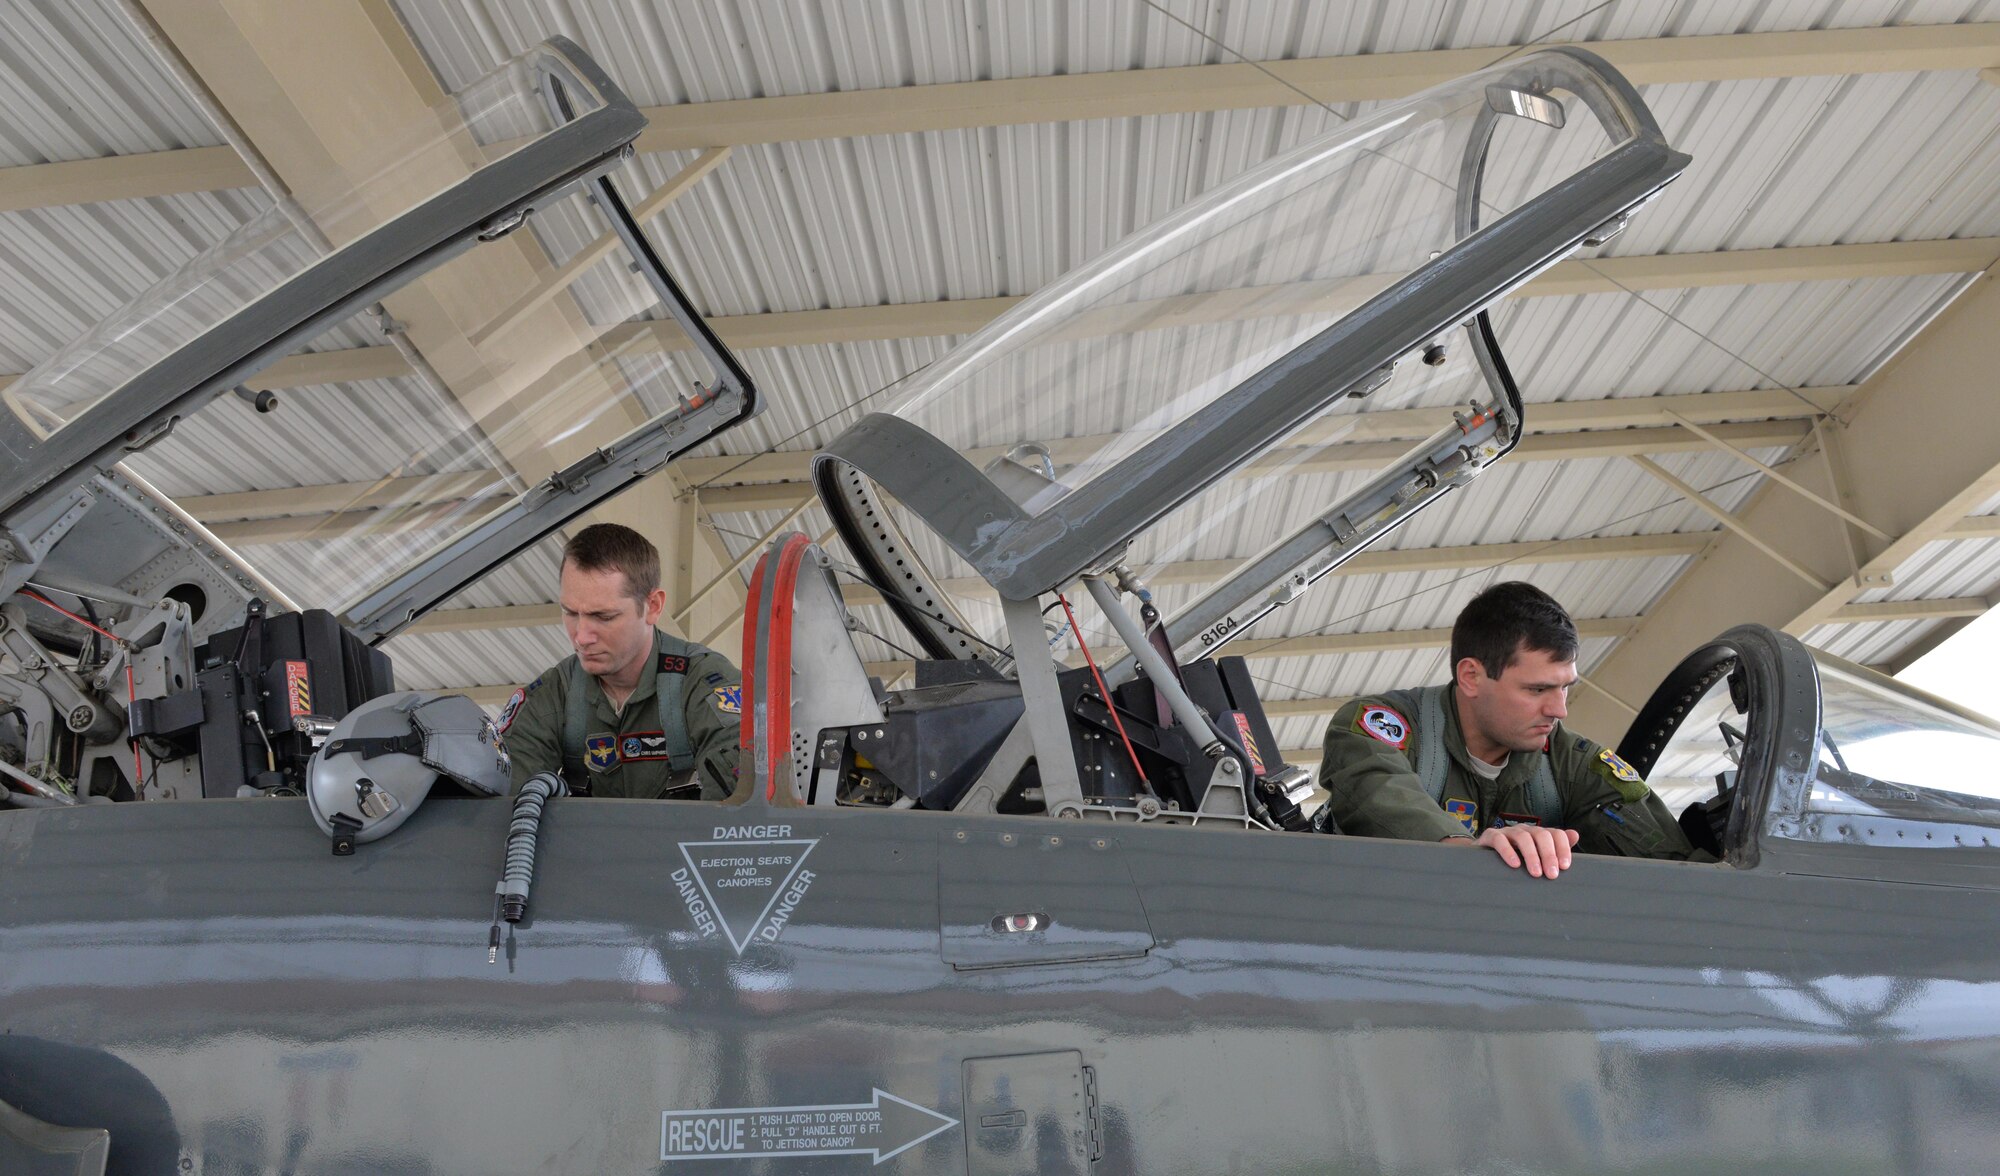 Capt. Chris Umphres, a 435th Fighter Training Squadron flight commander and instructor pilot, conducts a preflight check of a T-38 with 1st Lt. Kaleb Jenkins, a 435th FTS student pilot, before a training mission Jan. 5, 2016, at Joint Base San Antonio-Randolph, Texas. (U.S. Air Force photo/Tech. Sgt. Beth Anschutz)